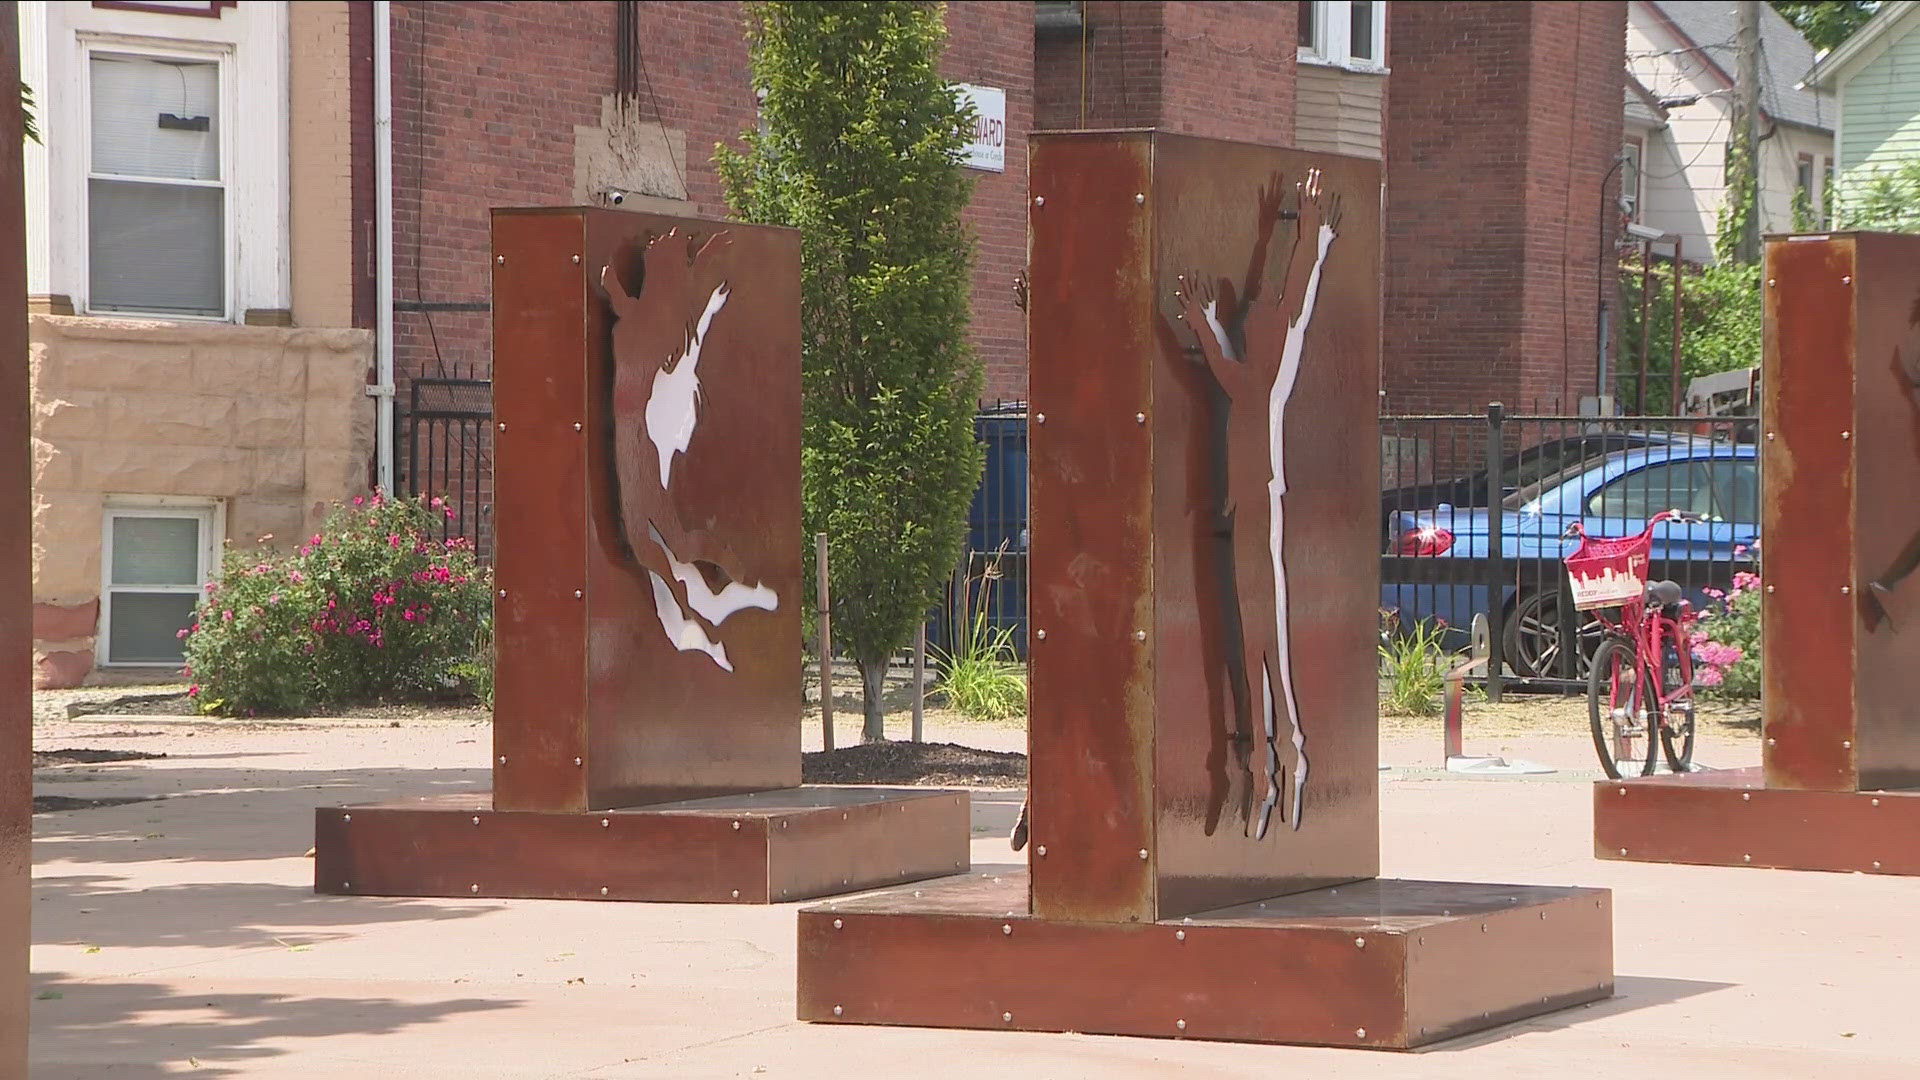 The sculptures are the work of local artist Mark Griffis